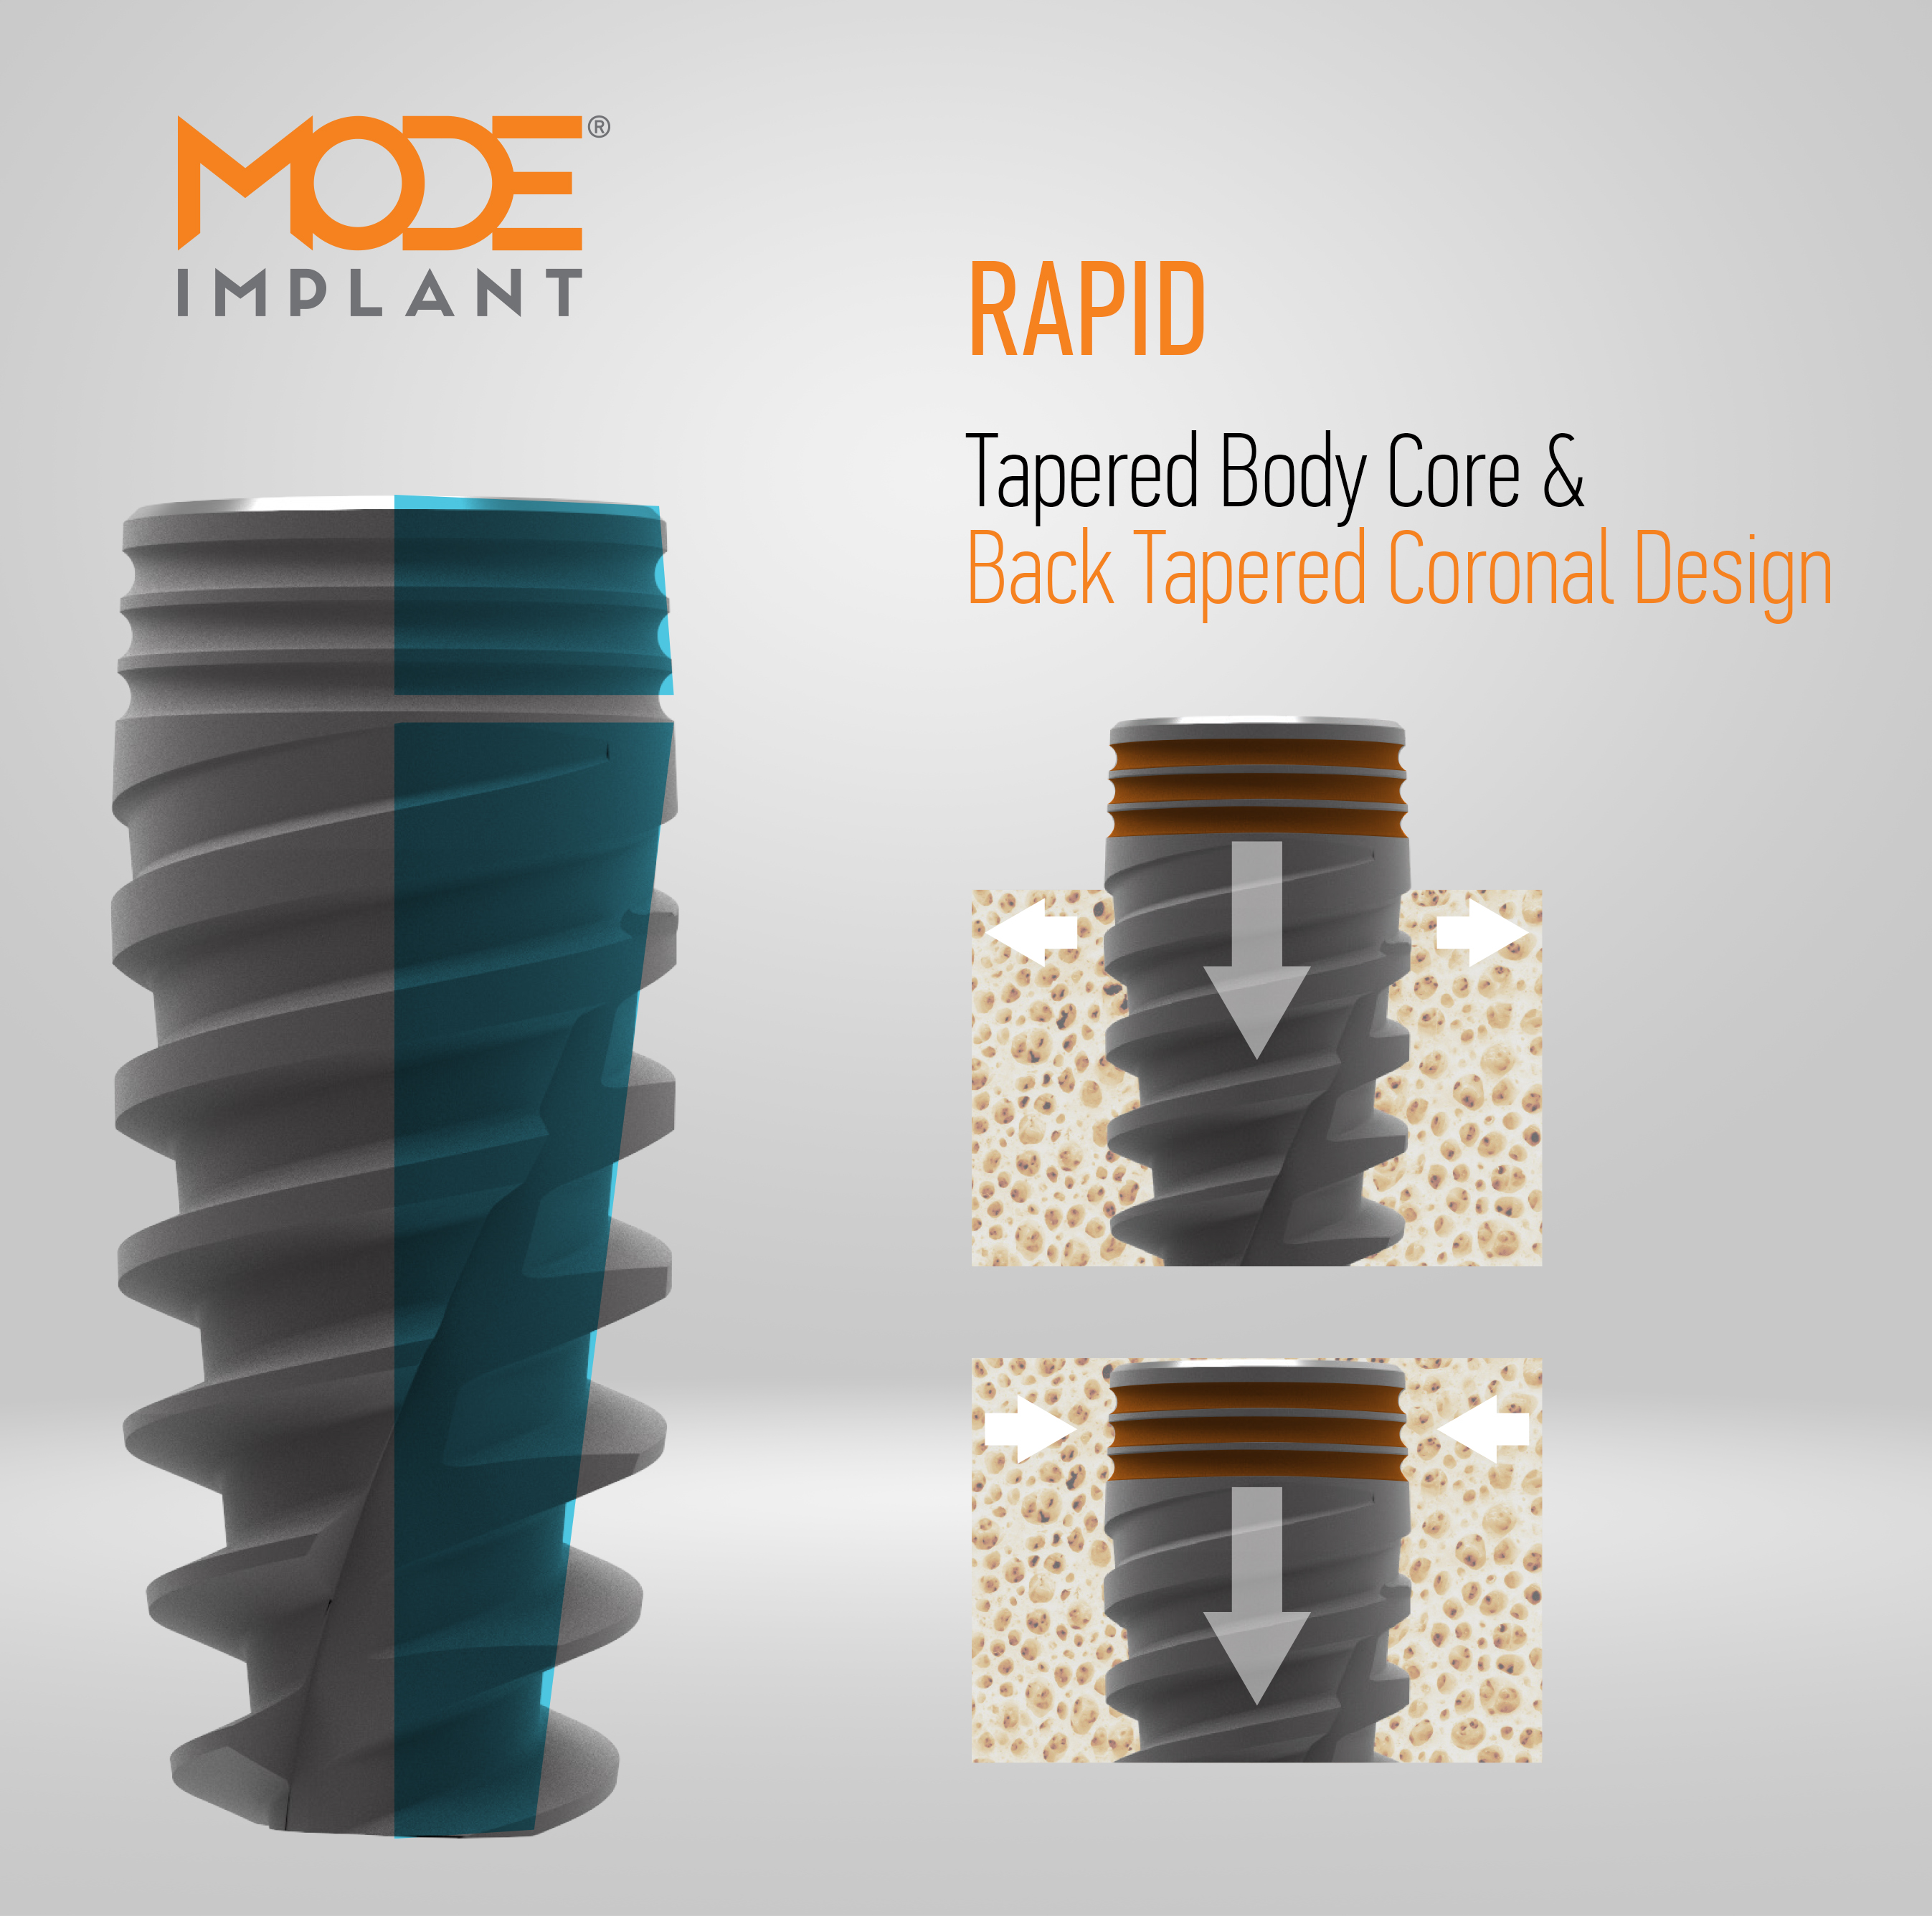 Tapered Body Core & <br><span>Back Tapered Coronal Design</span>